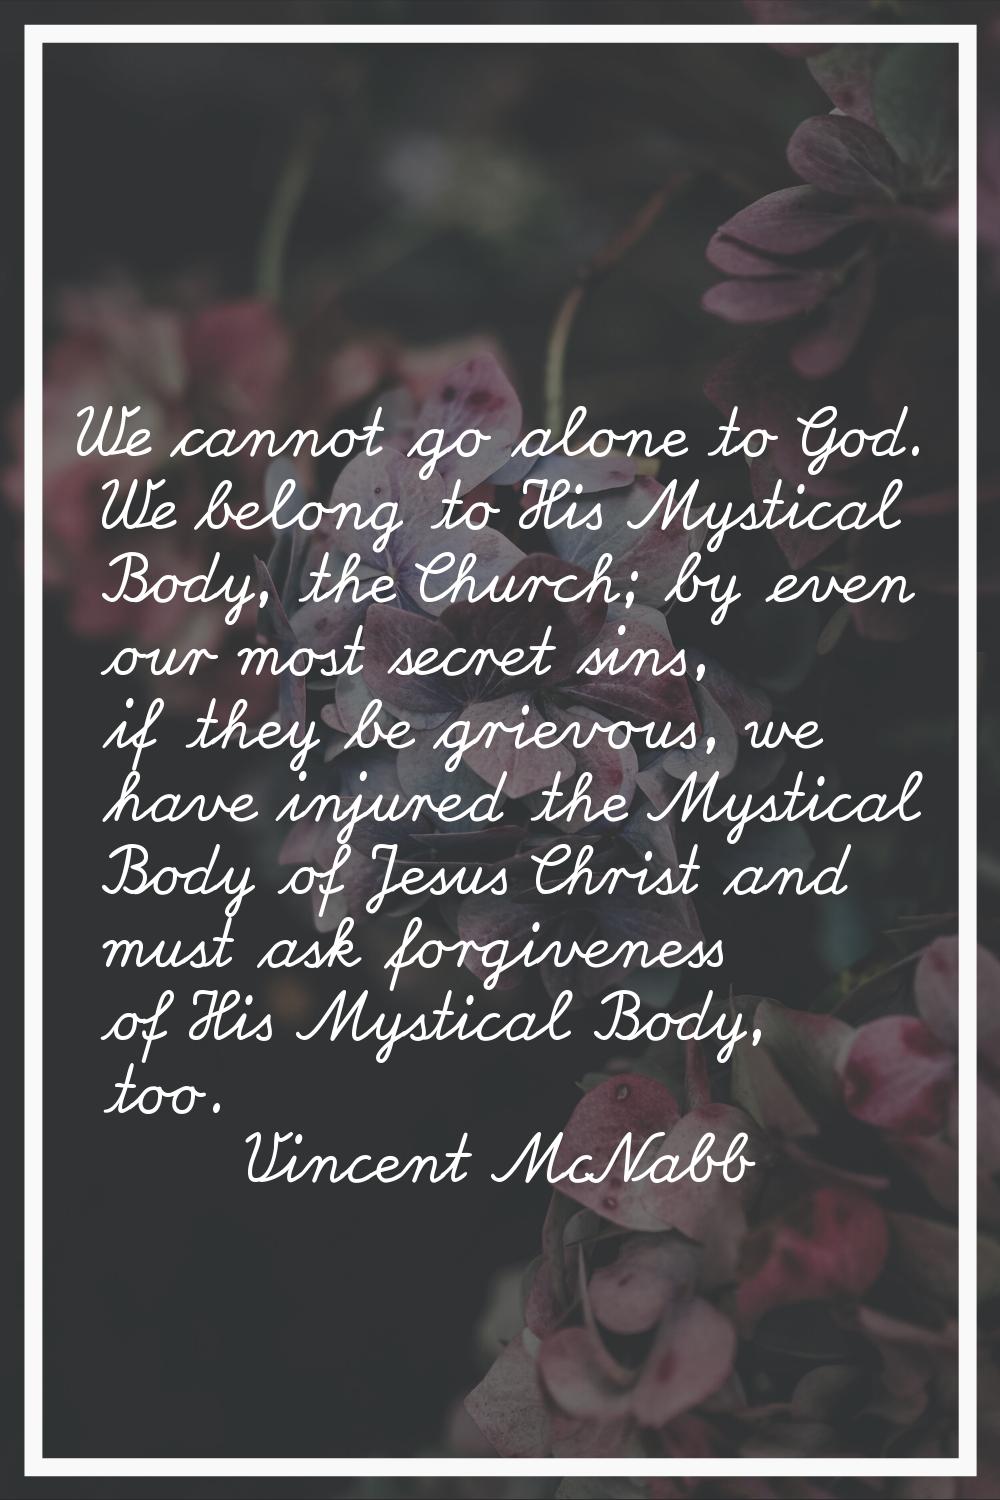 We cannot go alone to God. We belong to His Mystical Body, the Church; by even our most secret sins